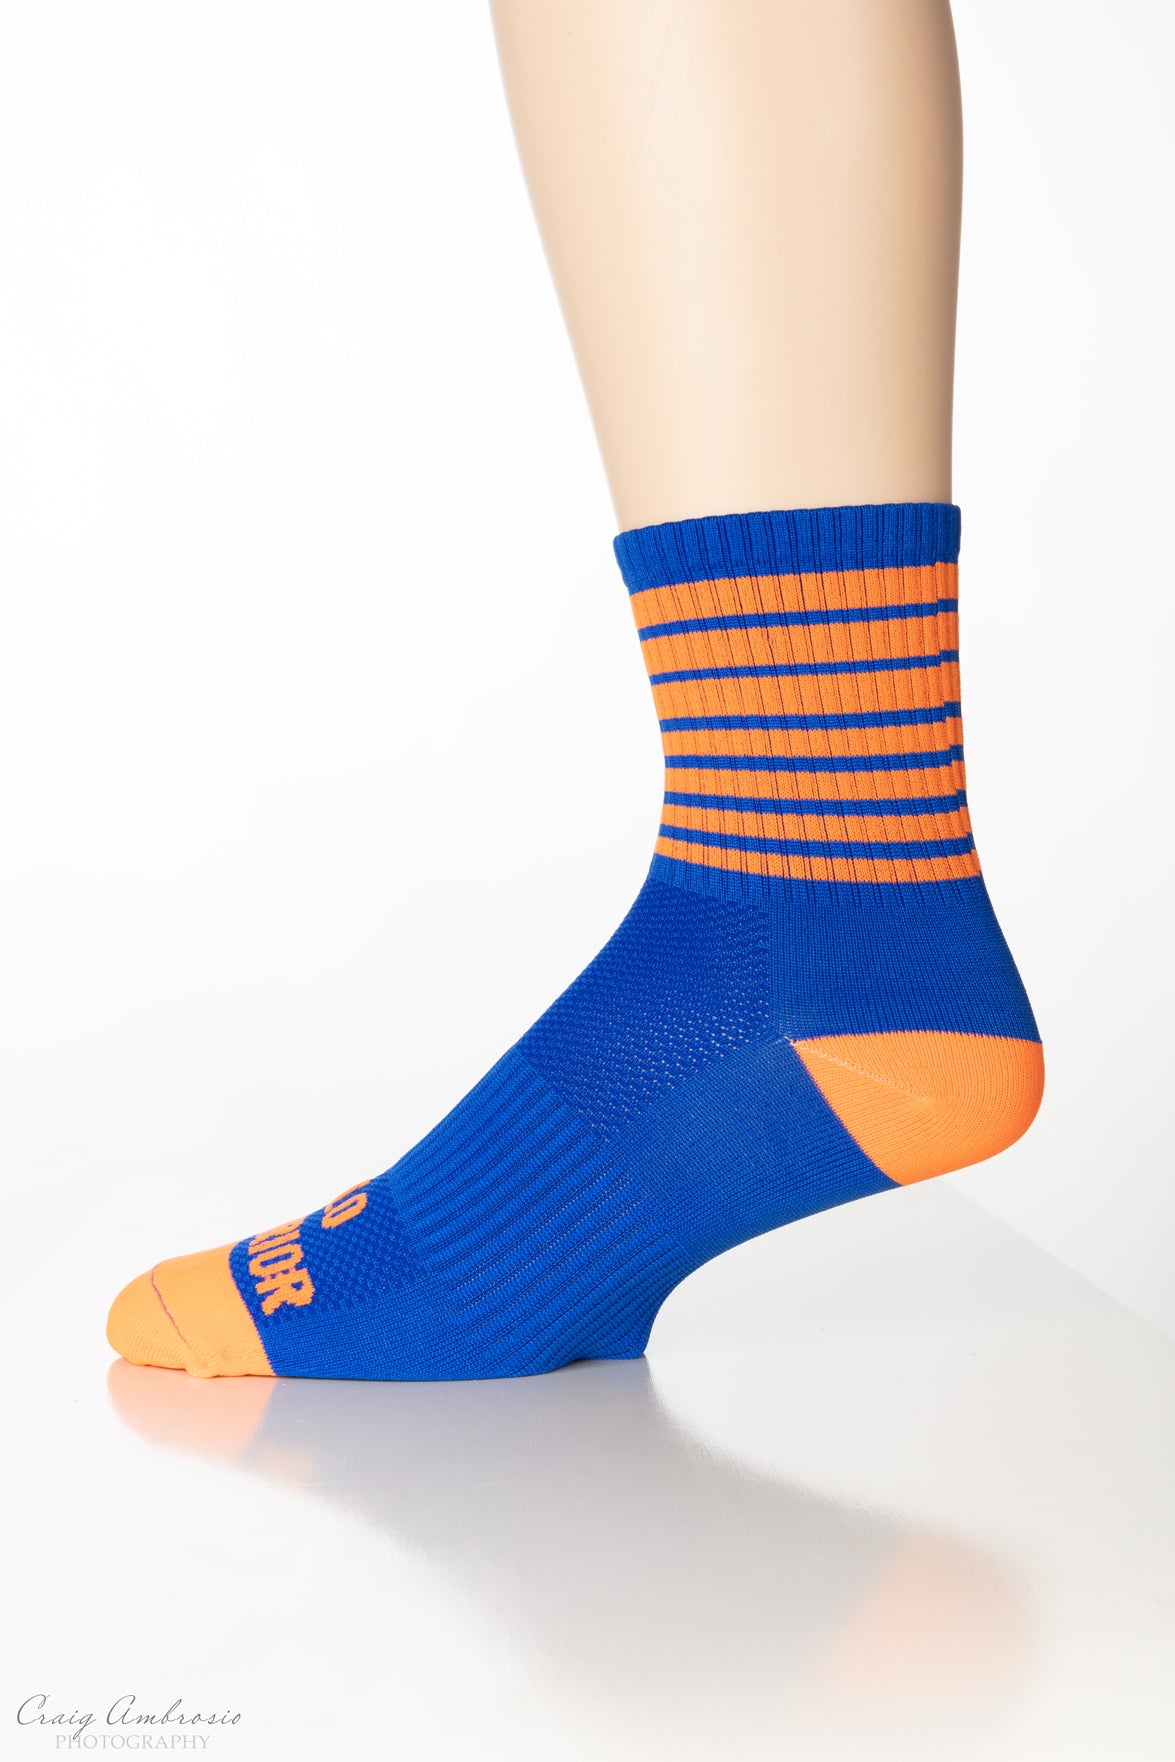 STRIPES Men’s and Women’s Compression Cycling socks